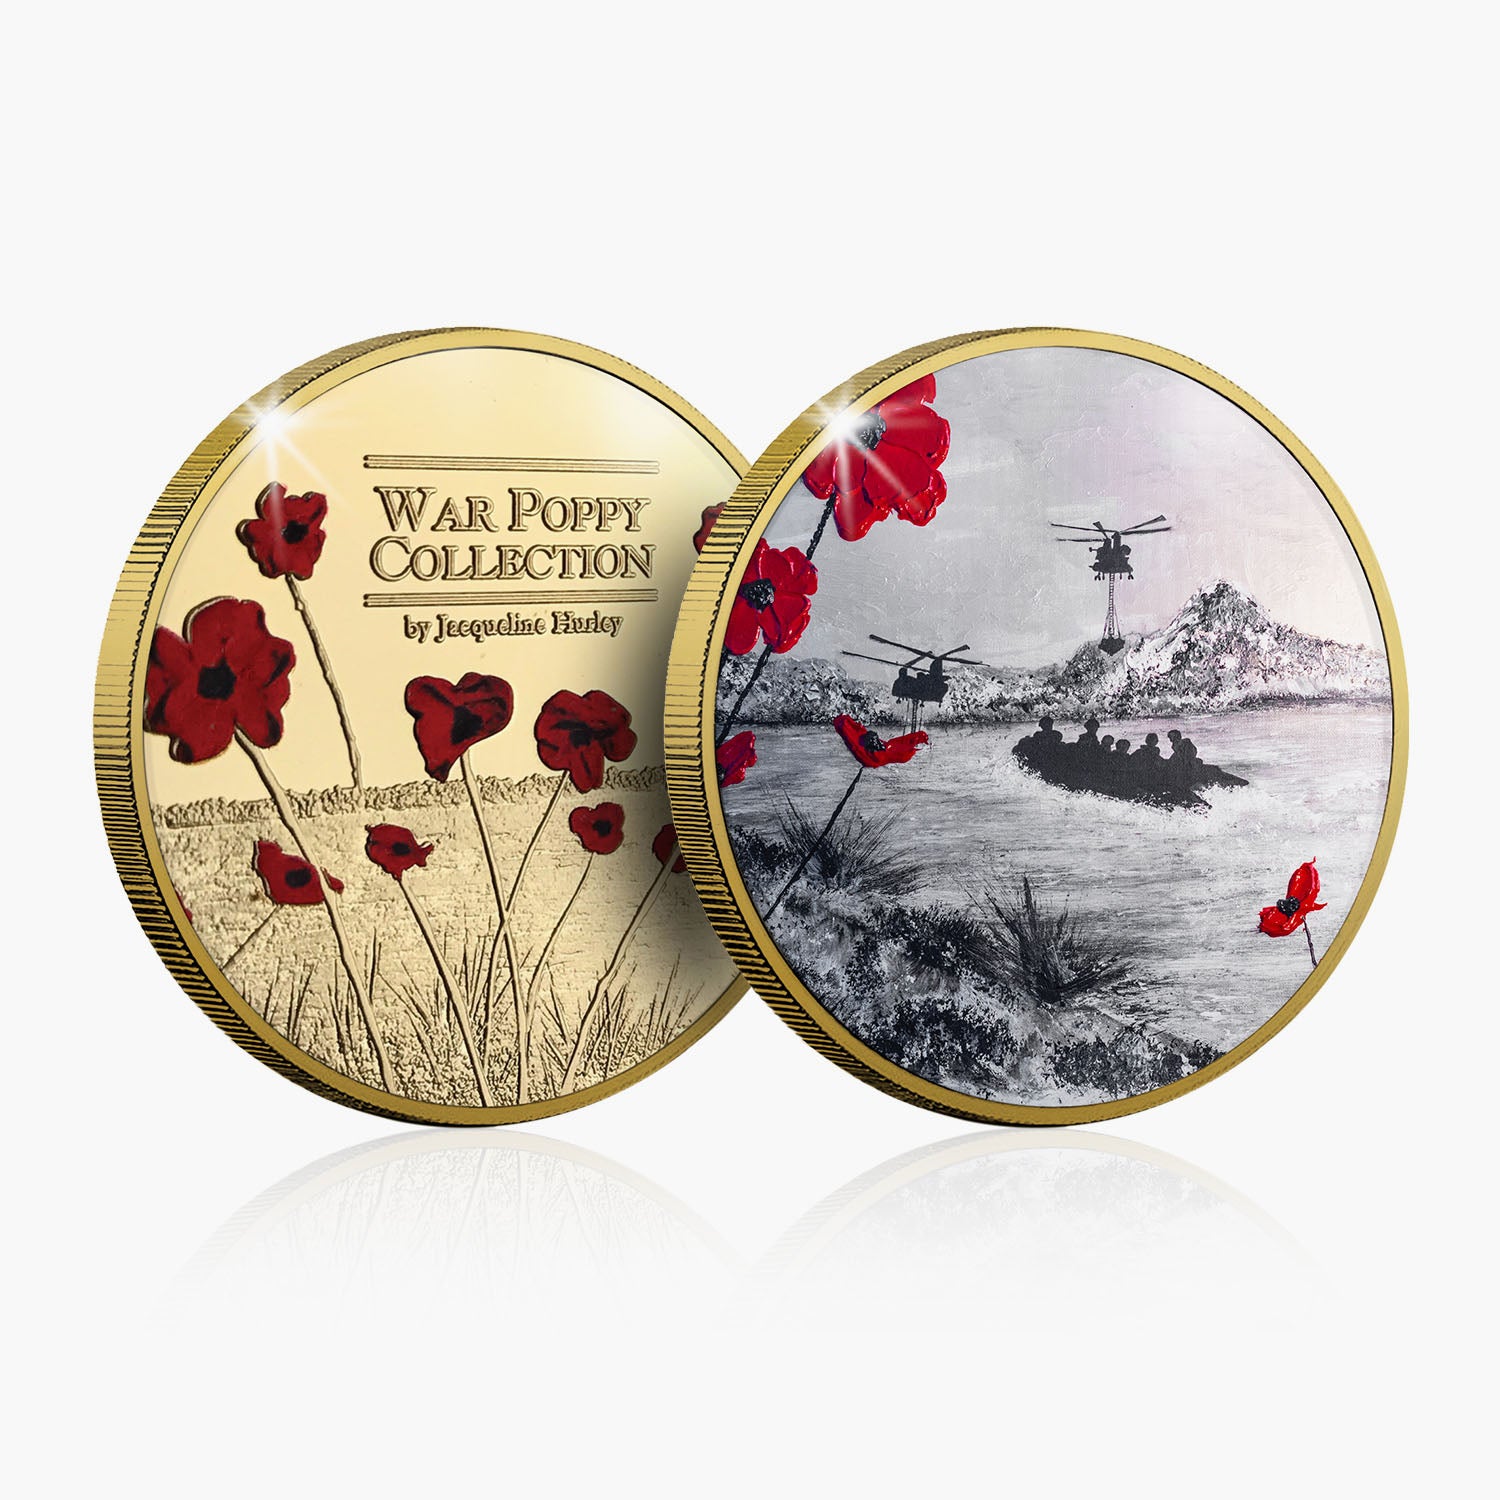 Mission of Remembrance Gold-Plated Commemorative